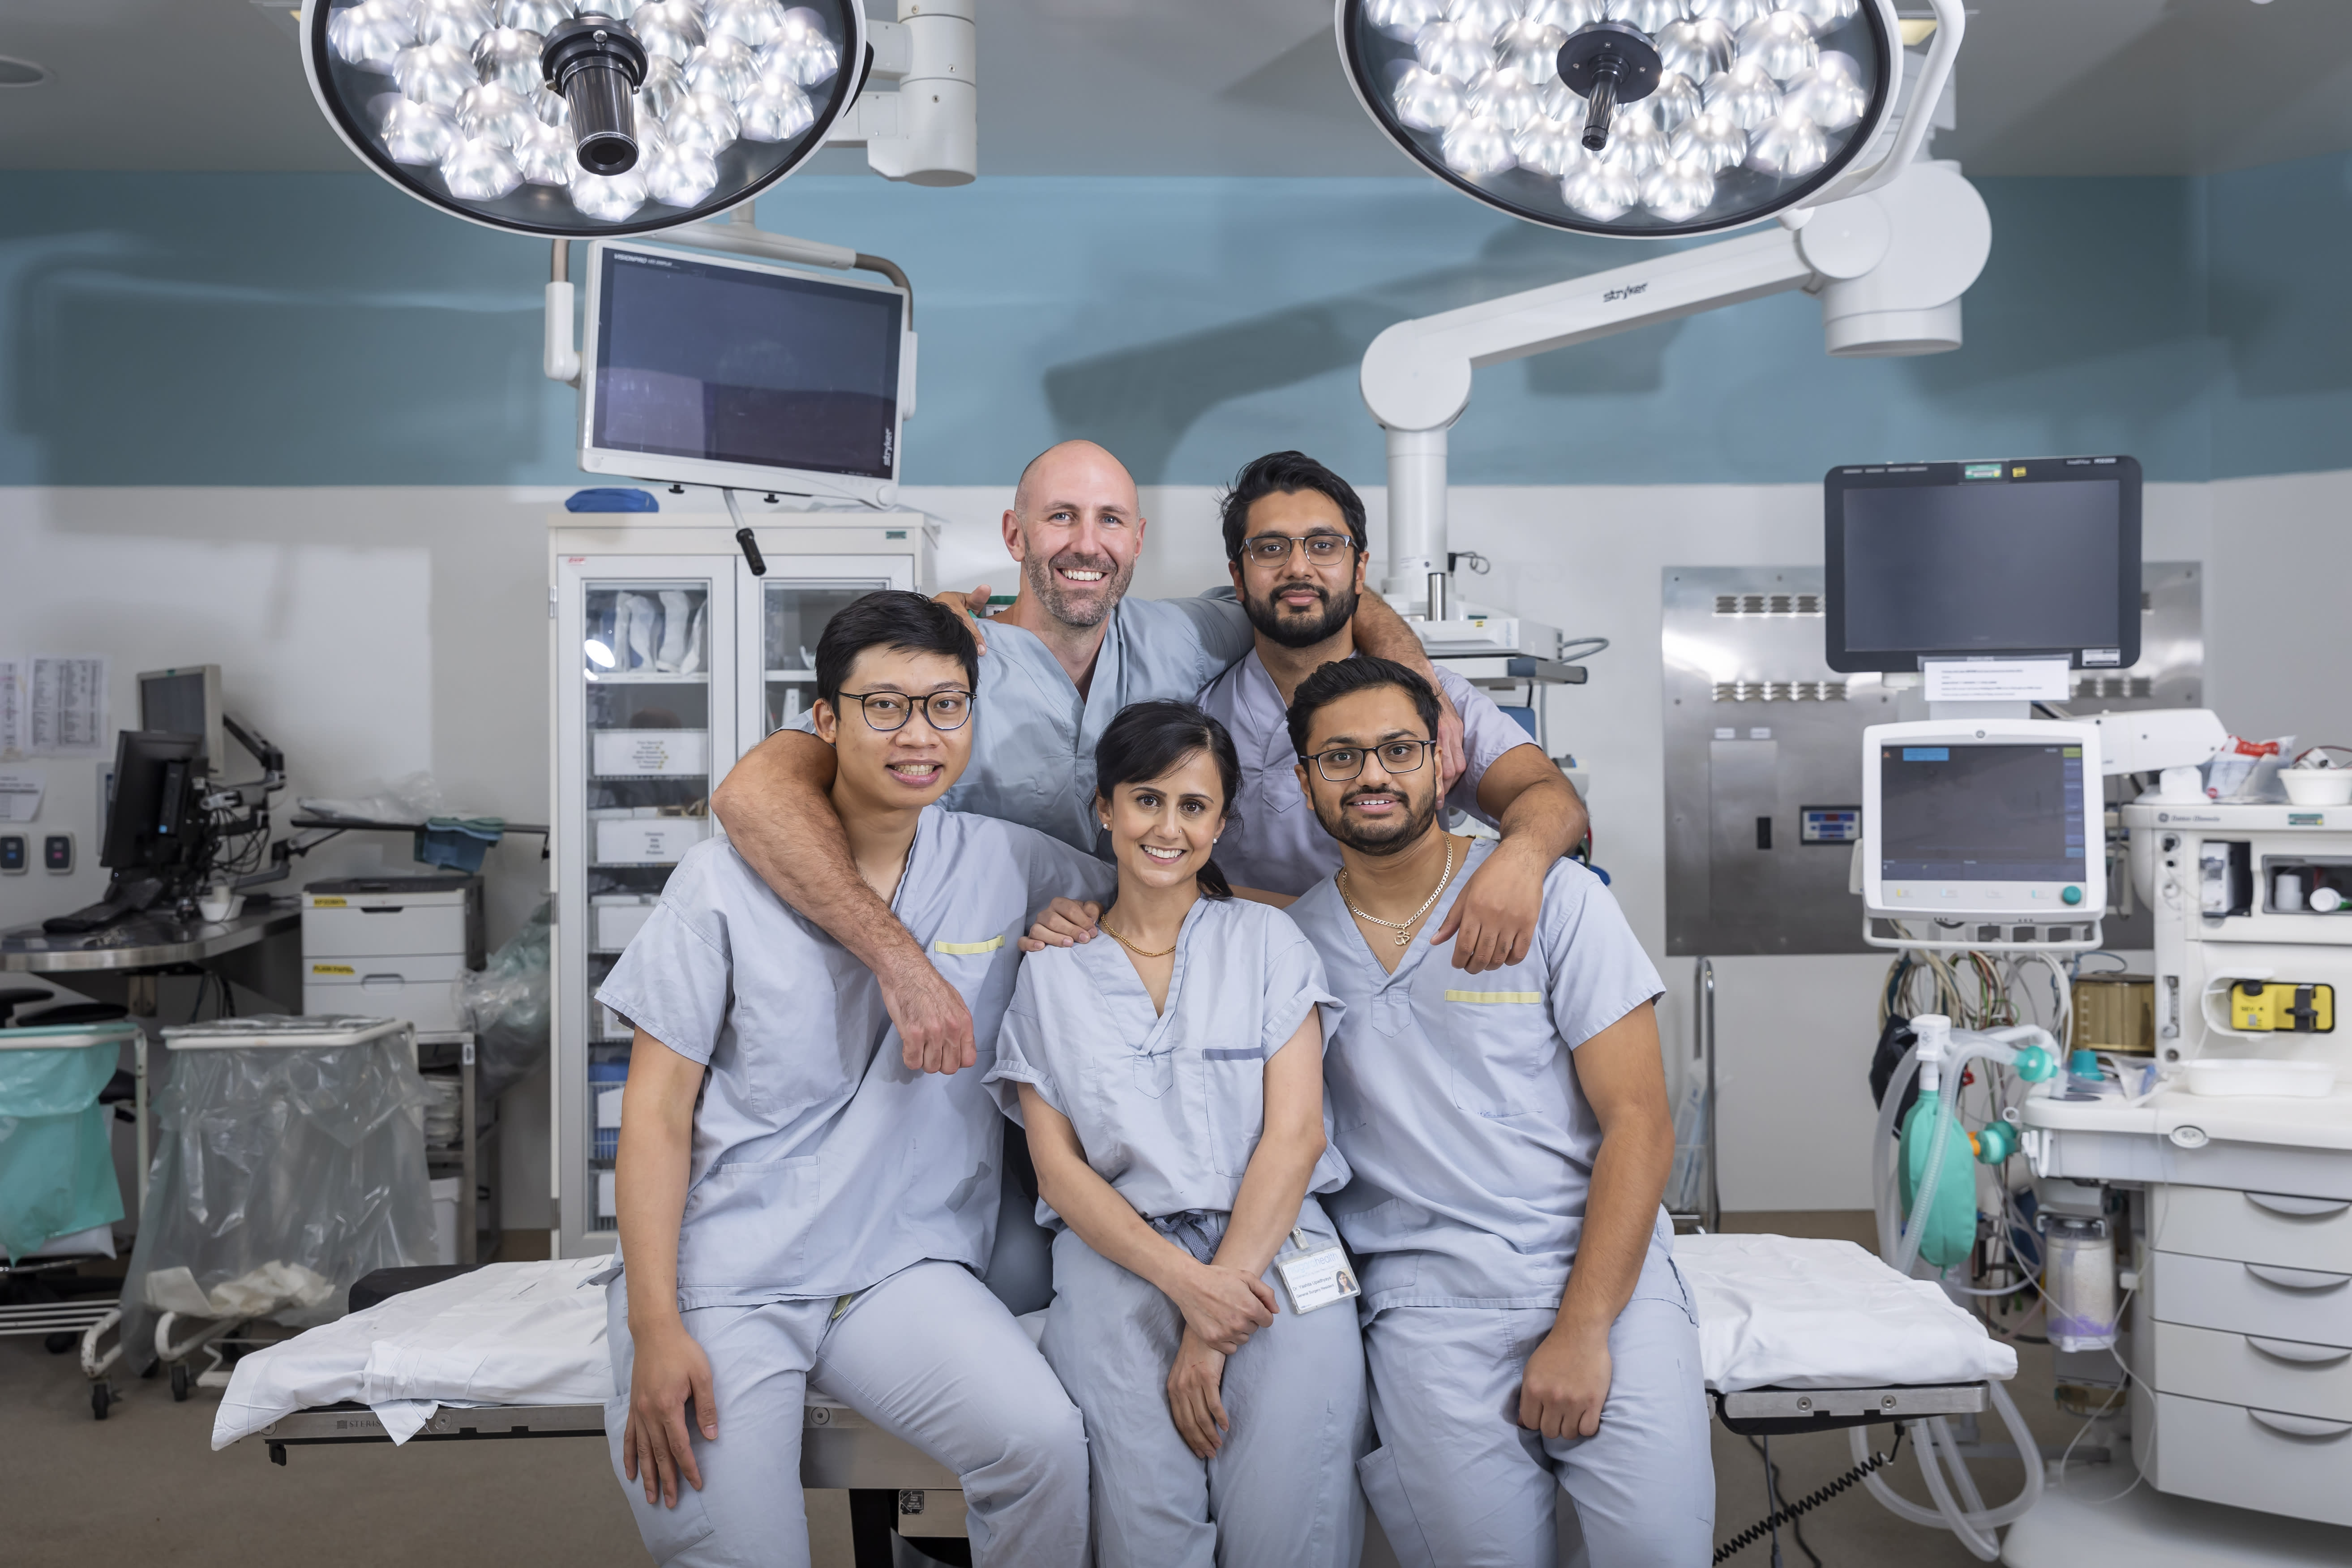 A team of young doctors wearing scrubs gather in a hospital operating room for a photo. They are smiling and surrounded by surgical equipment.